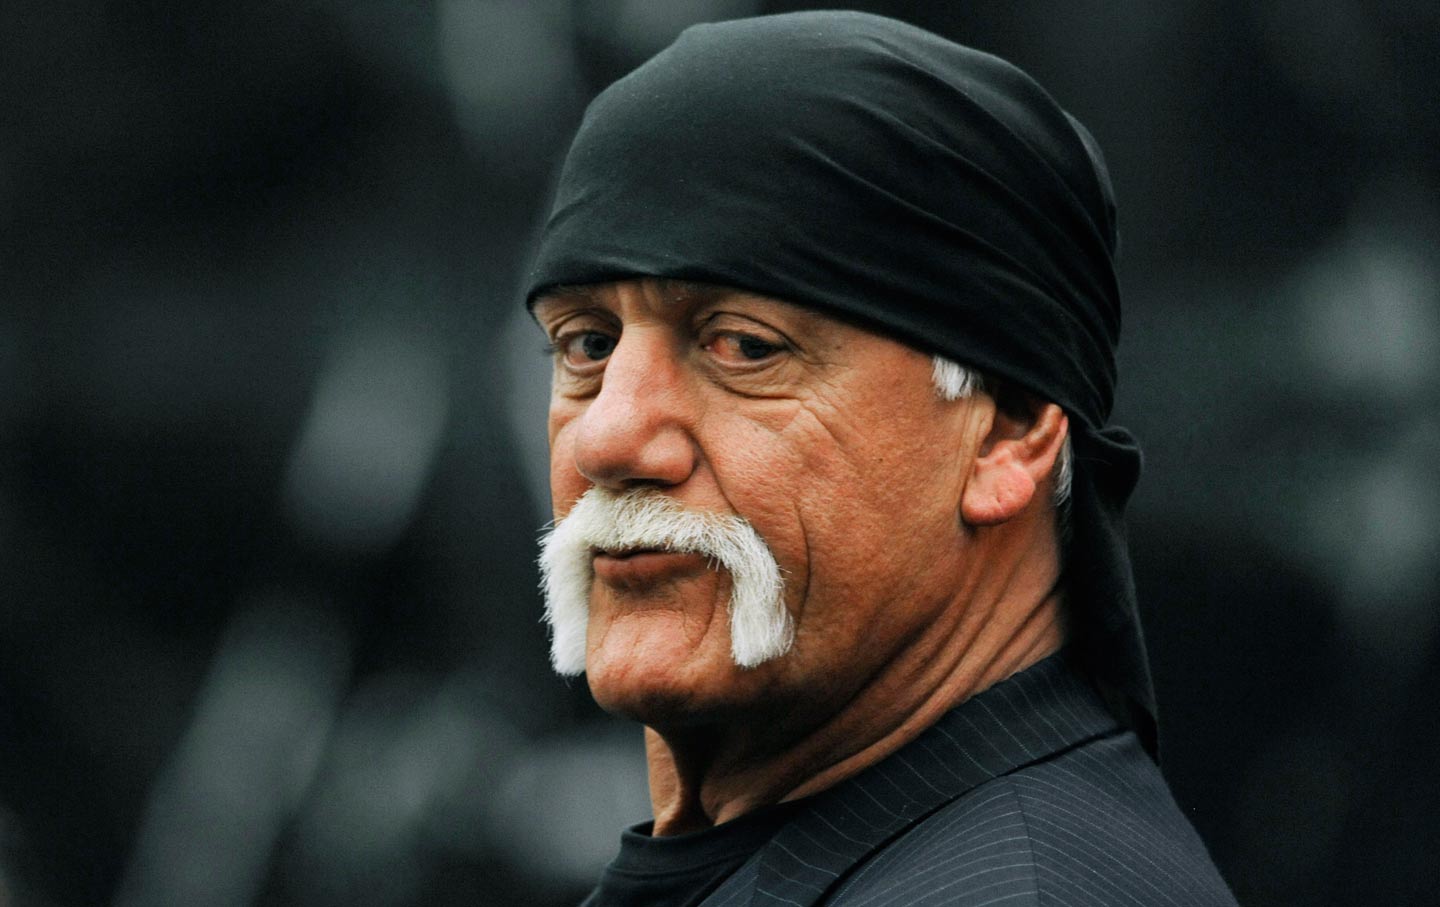 Does Hulk Hogan’s Lawsuit Against Gawker Really Threaten Freedom of the Press?